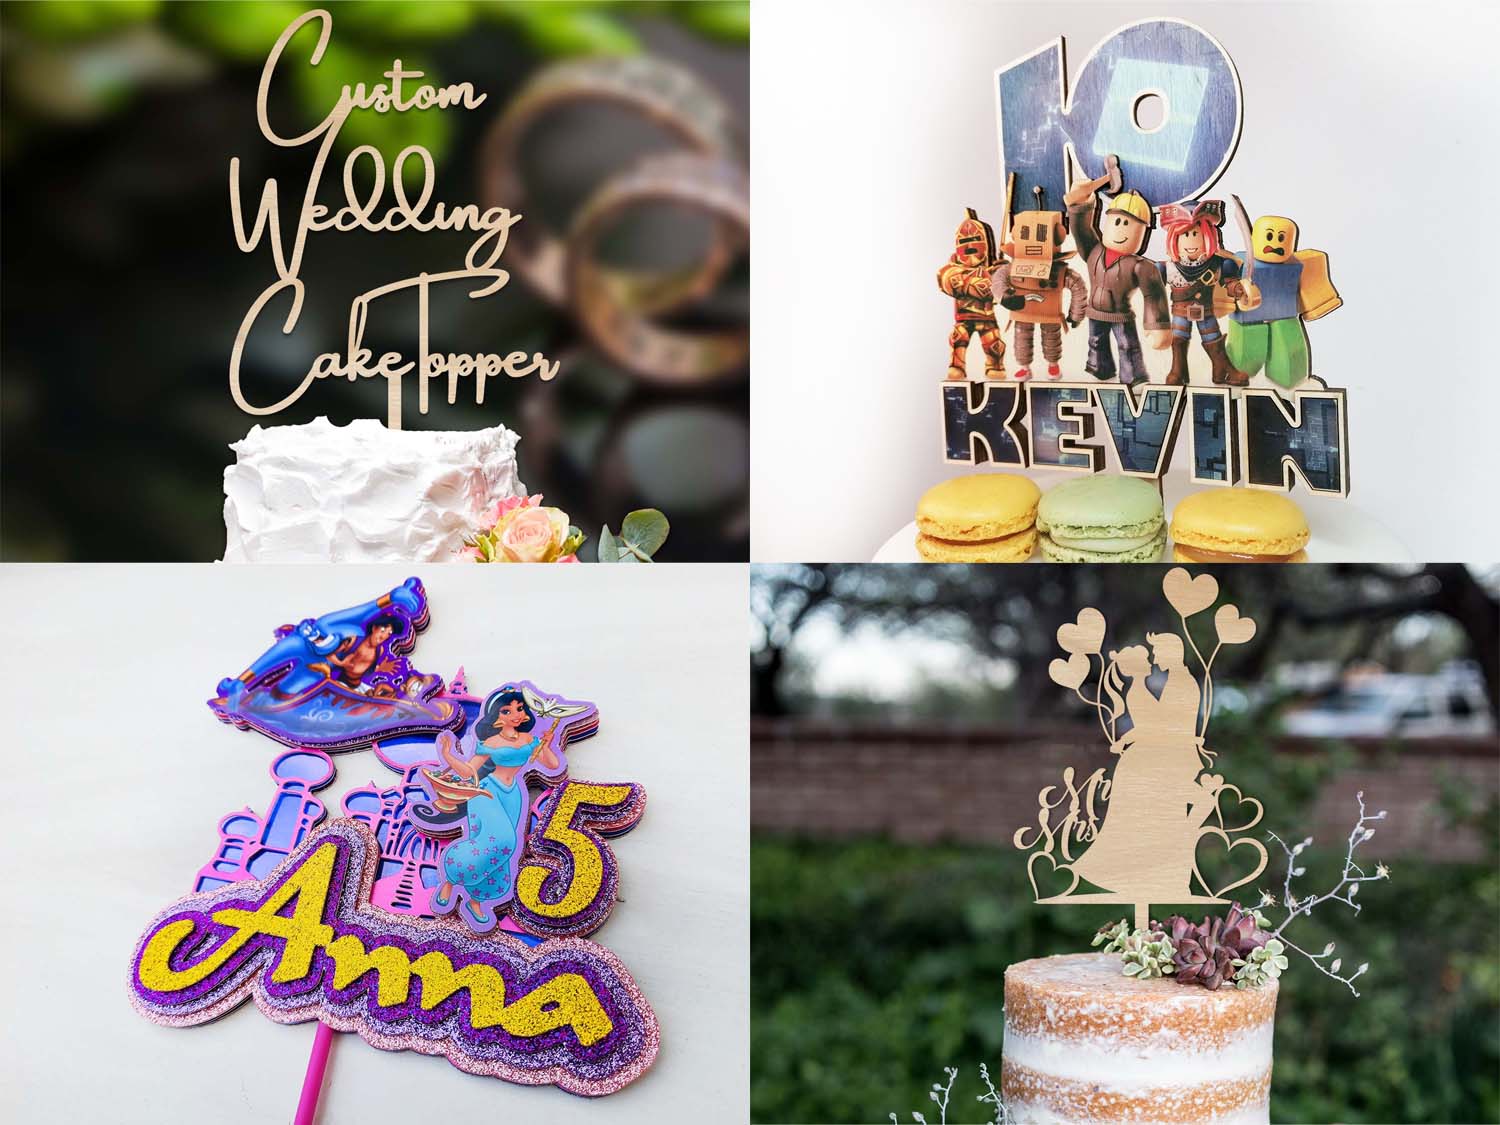 Personalised Cake Toppers - Edible Photos | Big Day Cakes